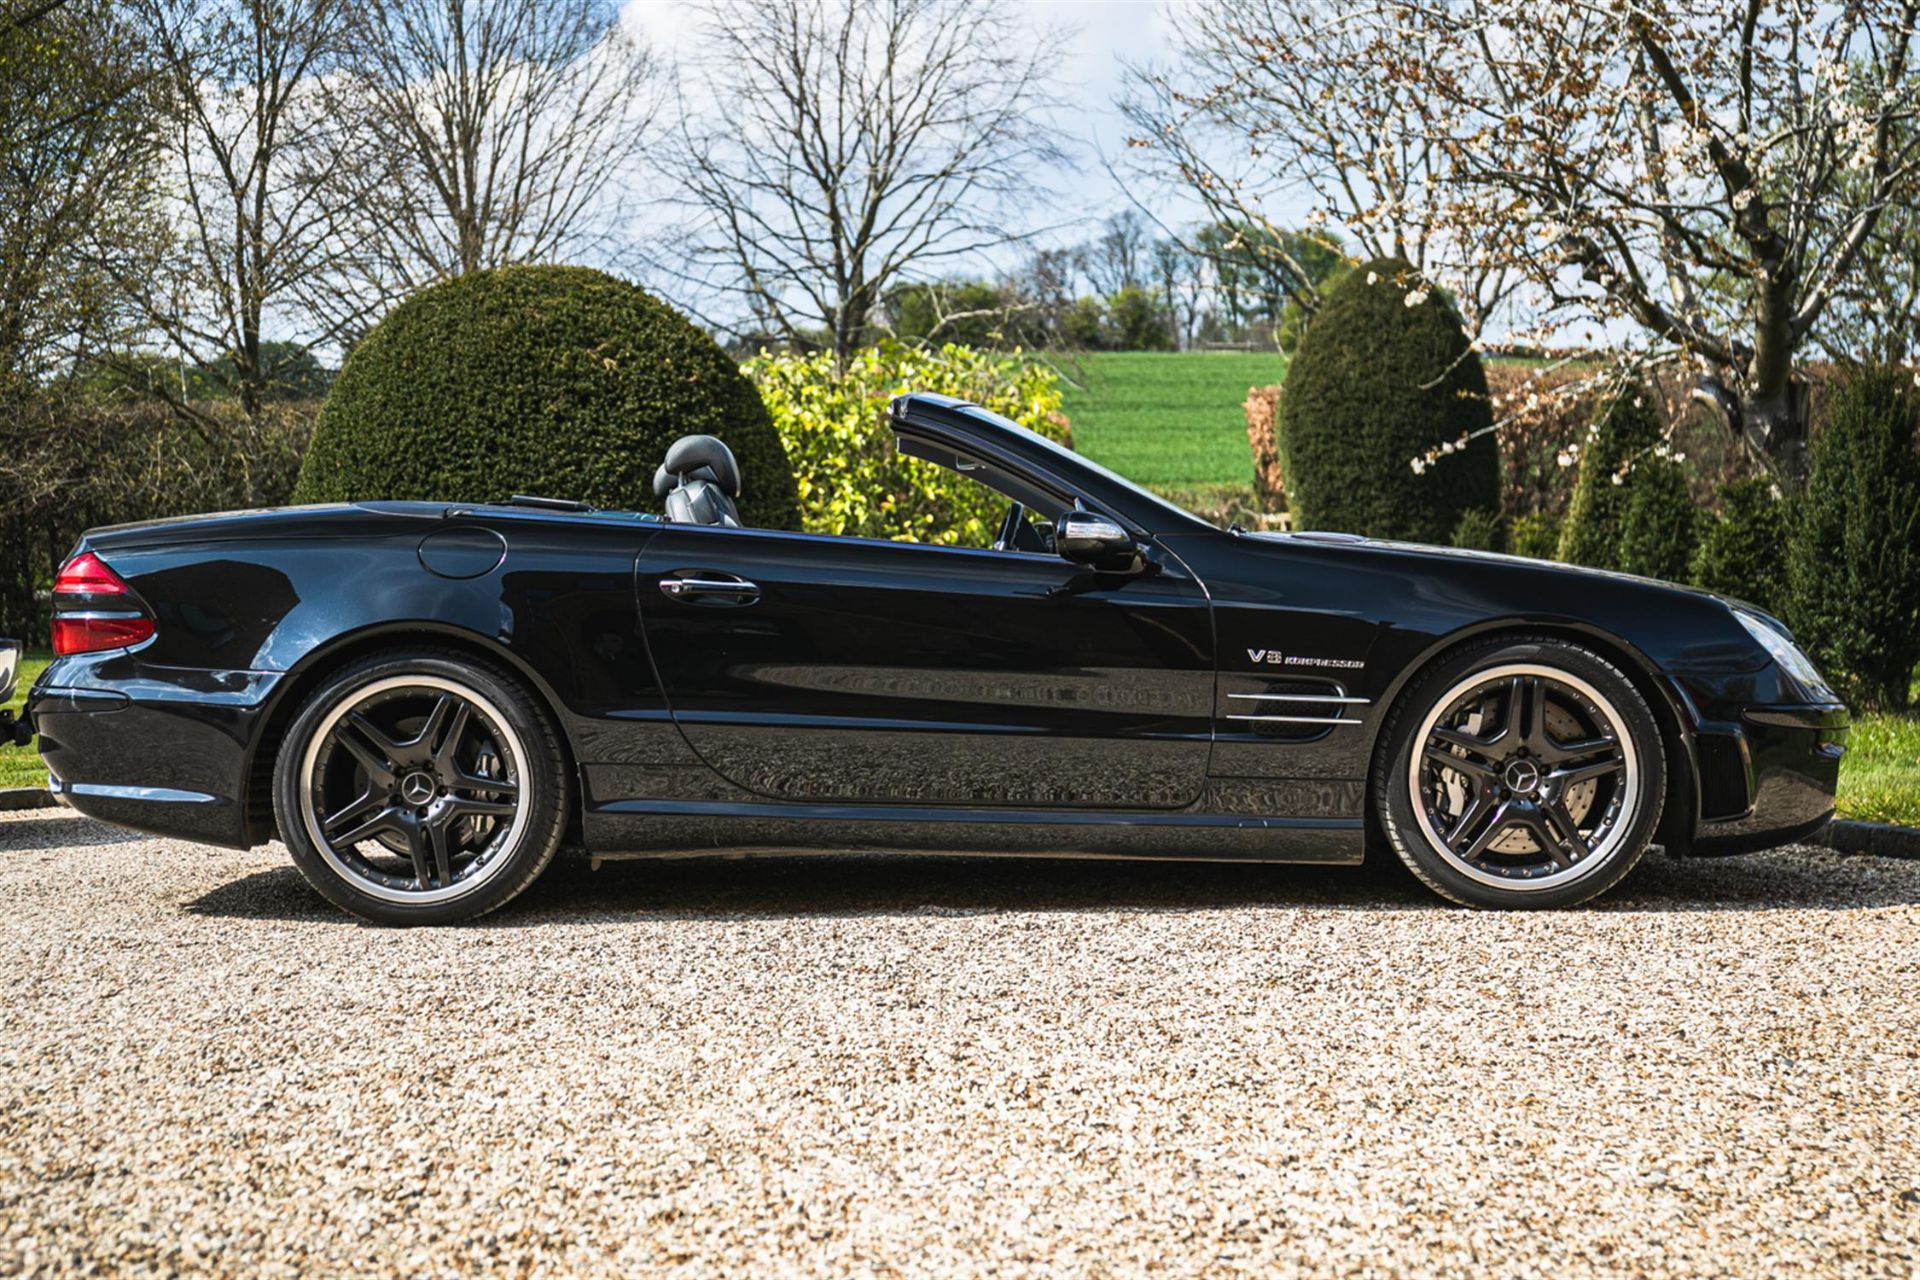 2004 Mercedes-Benz SL55 (R230) 'F1 Performance Pack' - Image 2 of 10